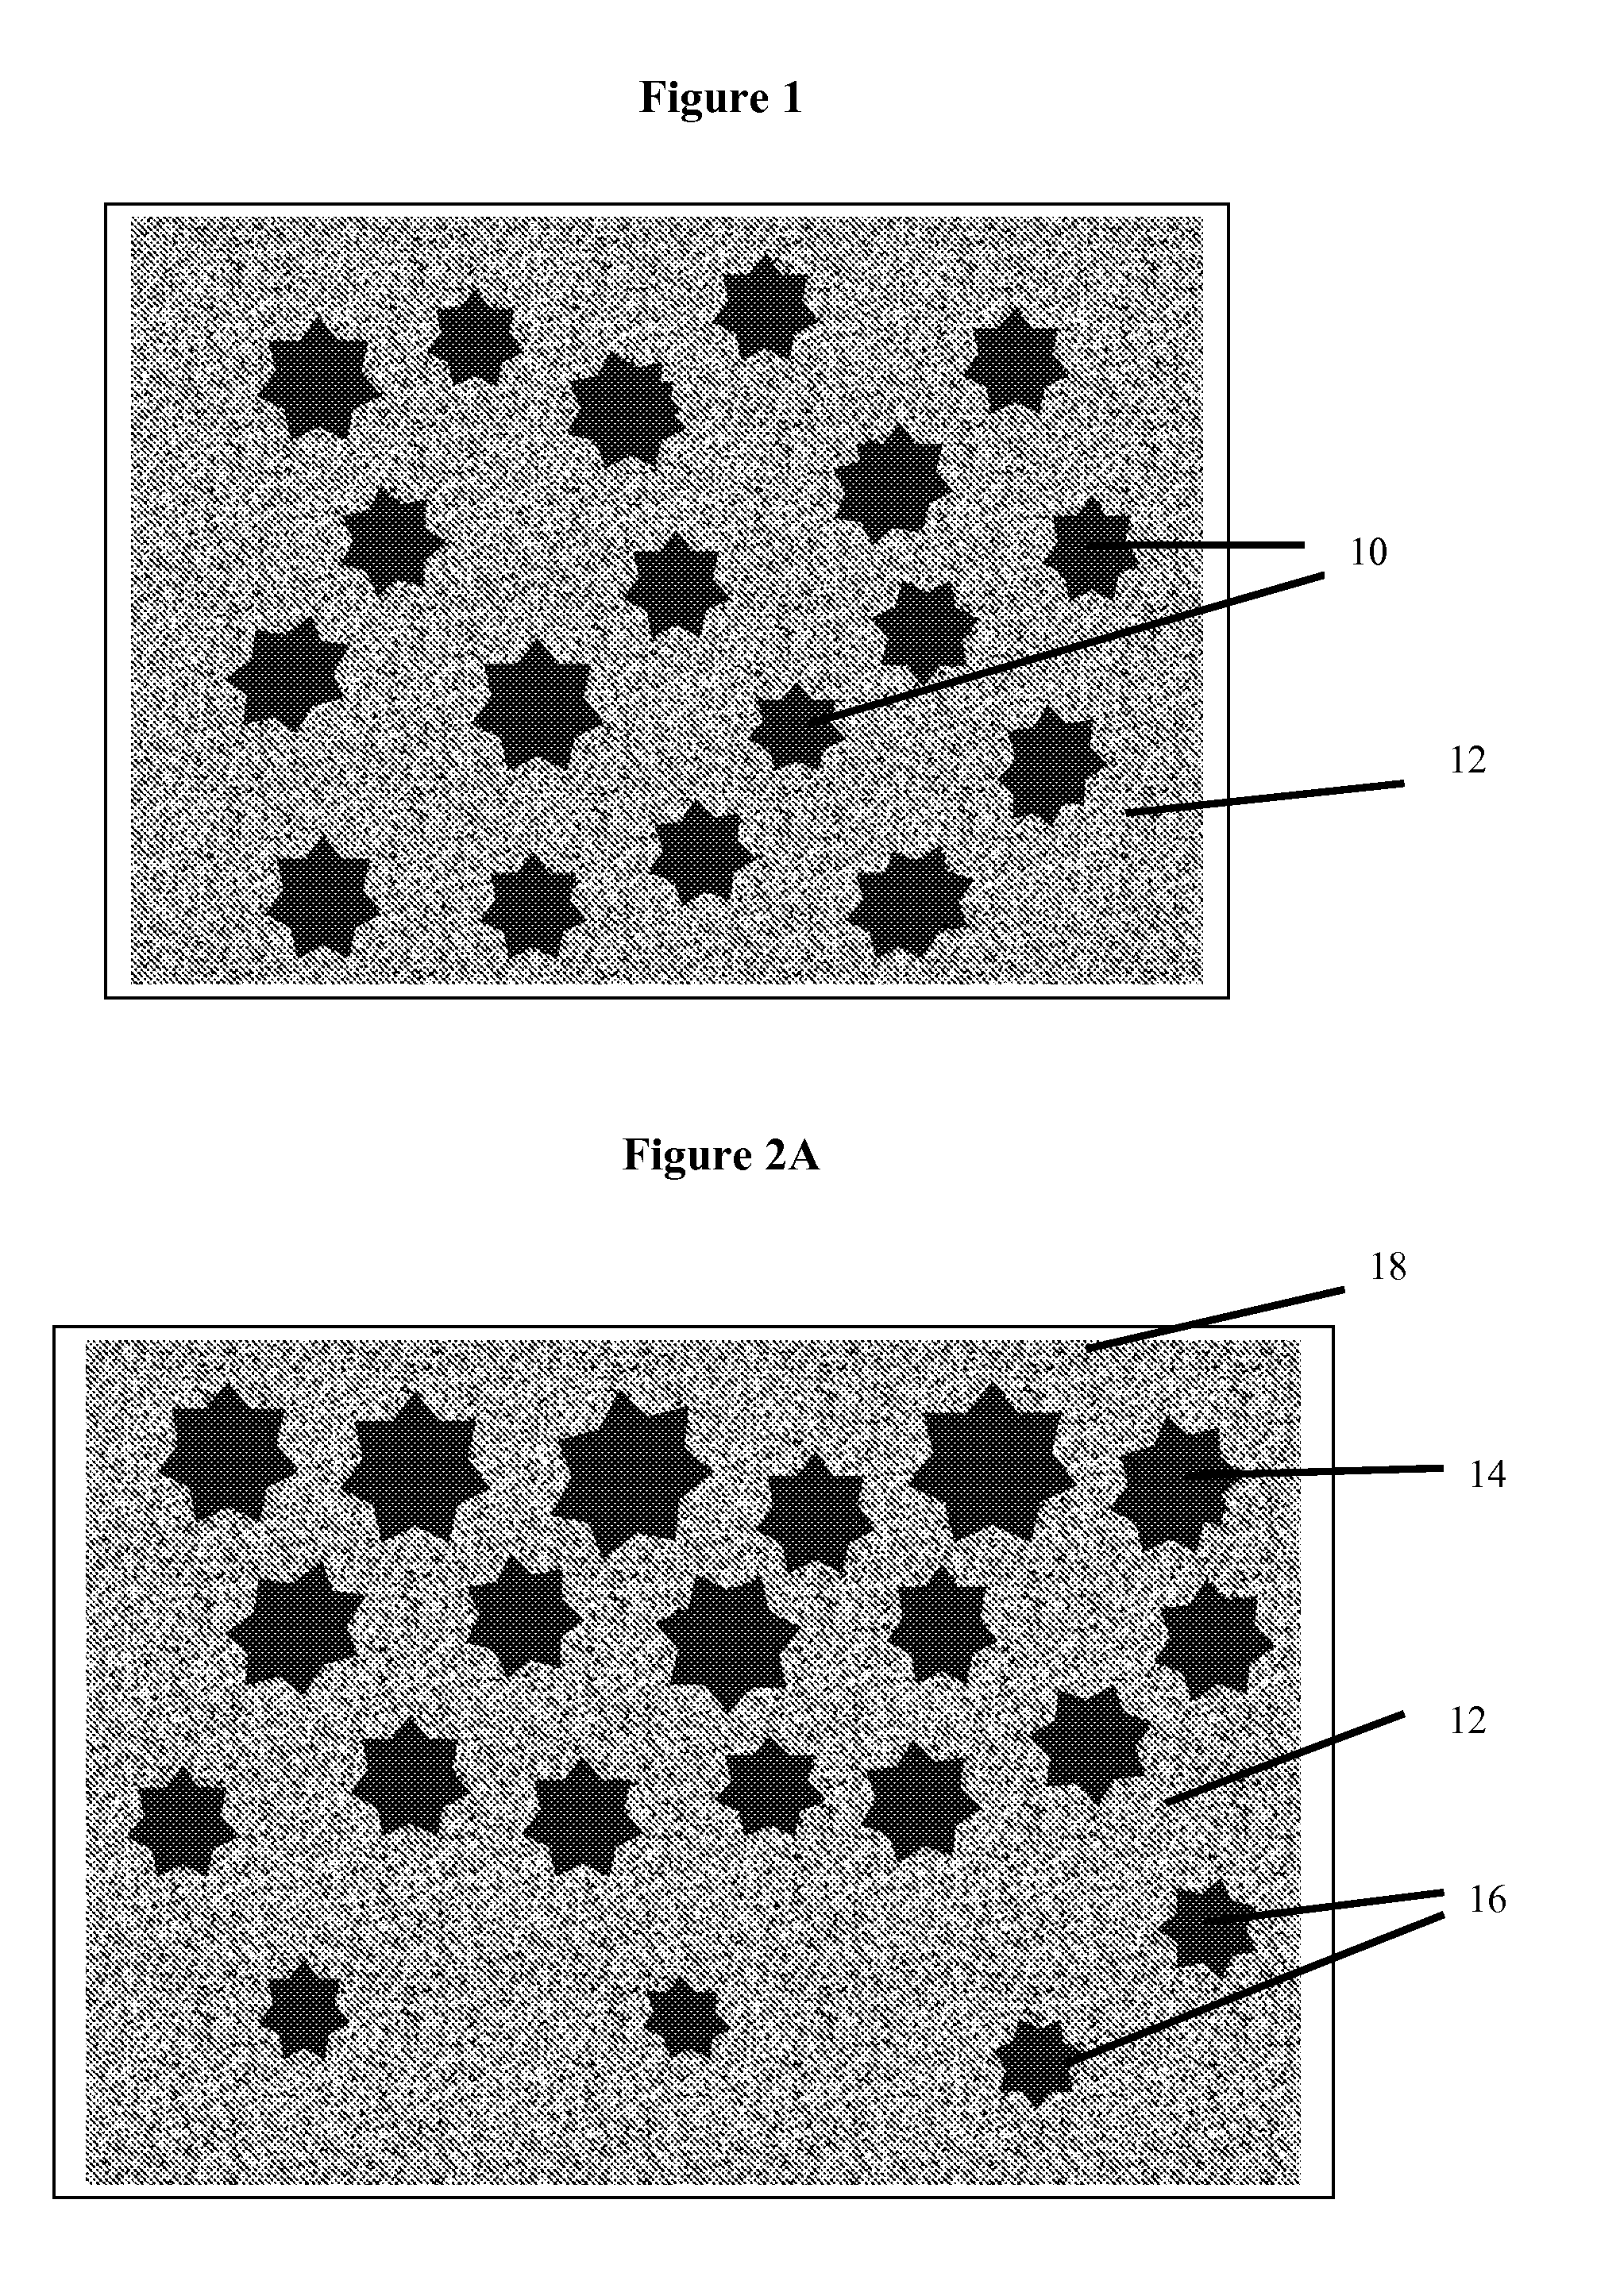 Advanced photoluminescent components and formulation/fabrication methods for production thereof